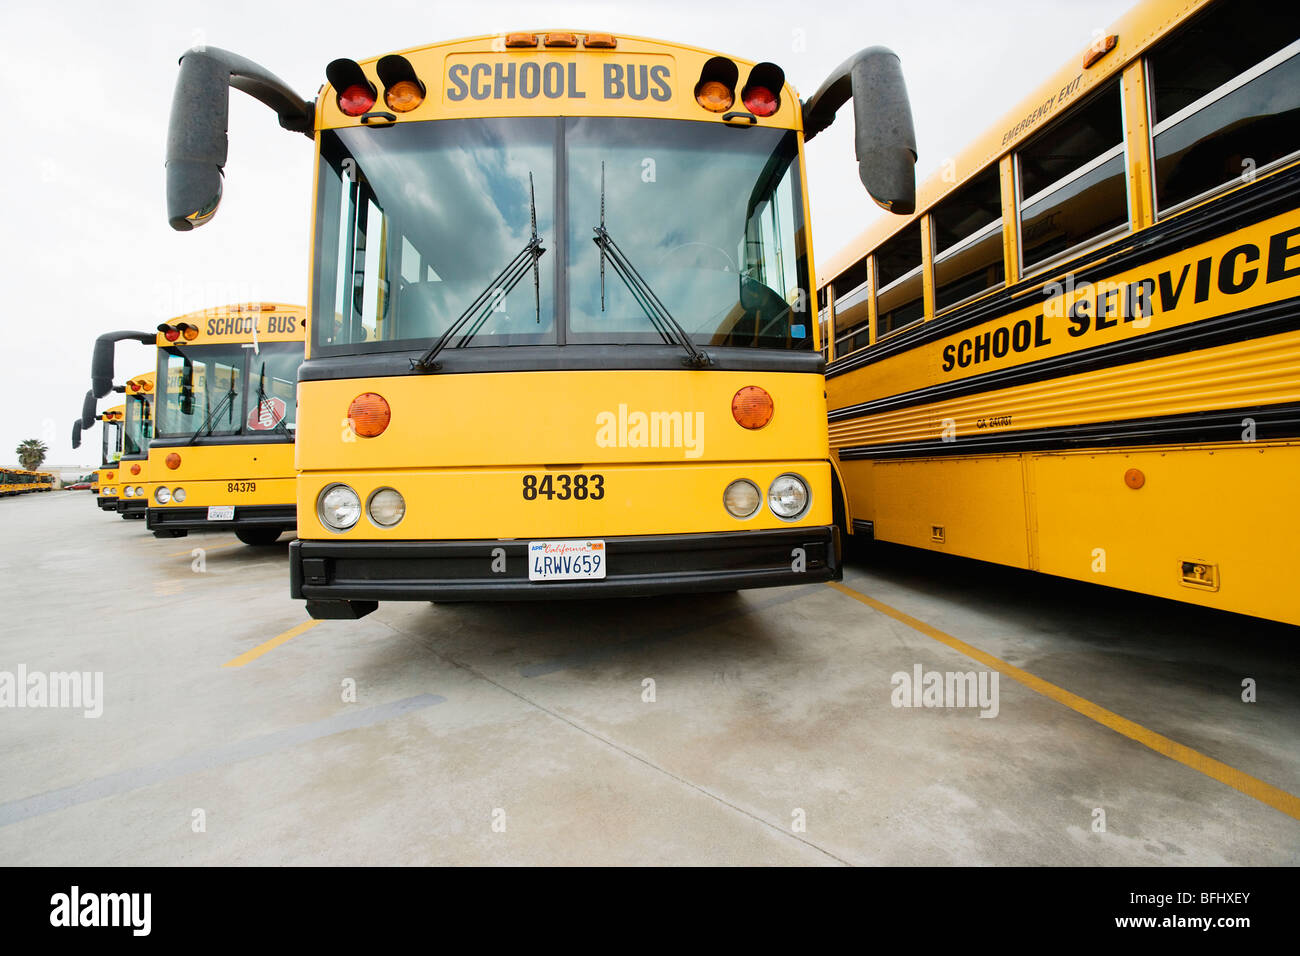 School Busses Parked in Lot Stock Photo